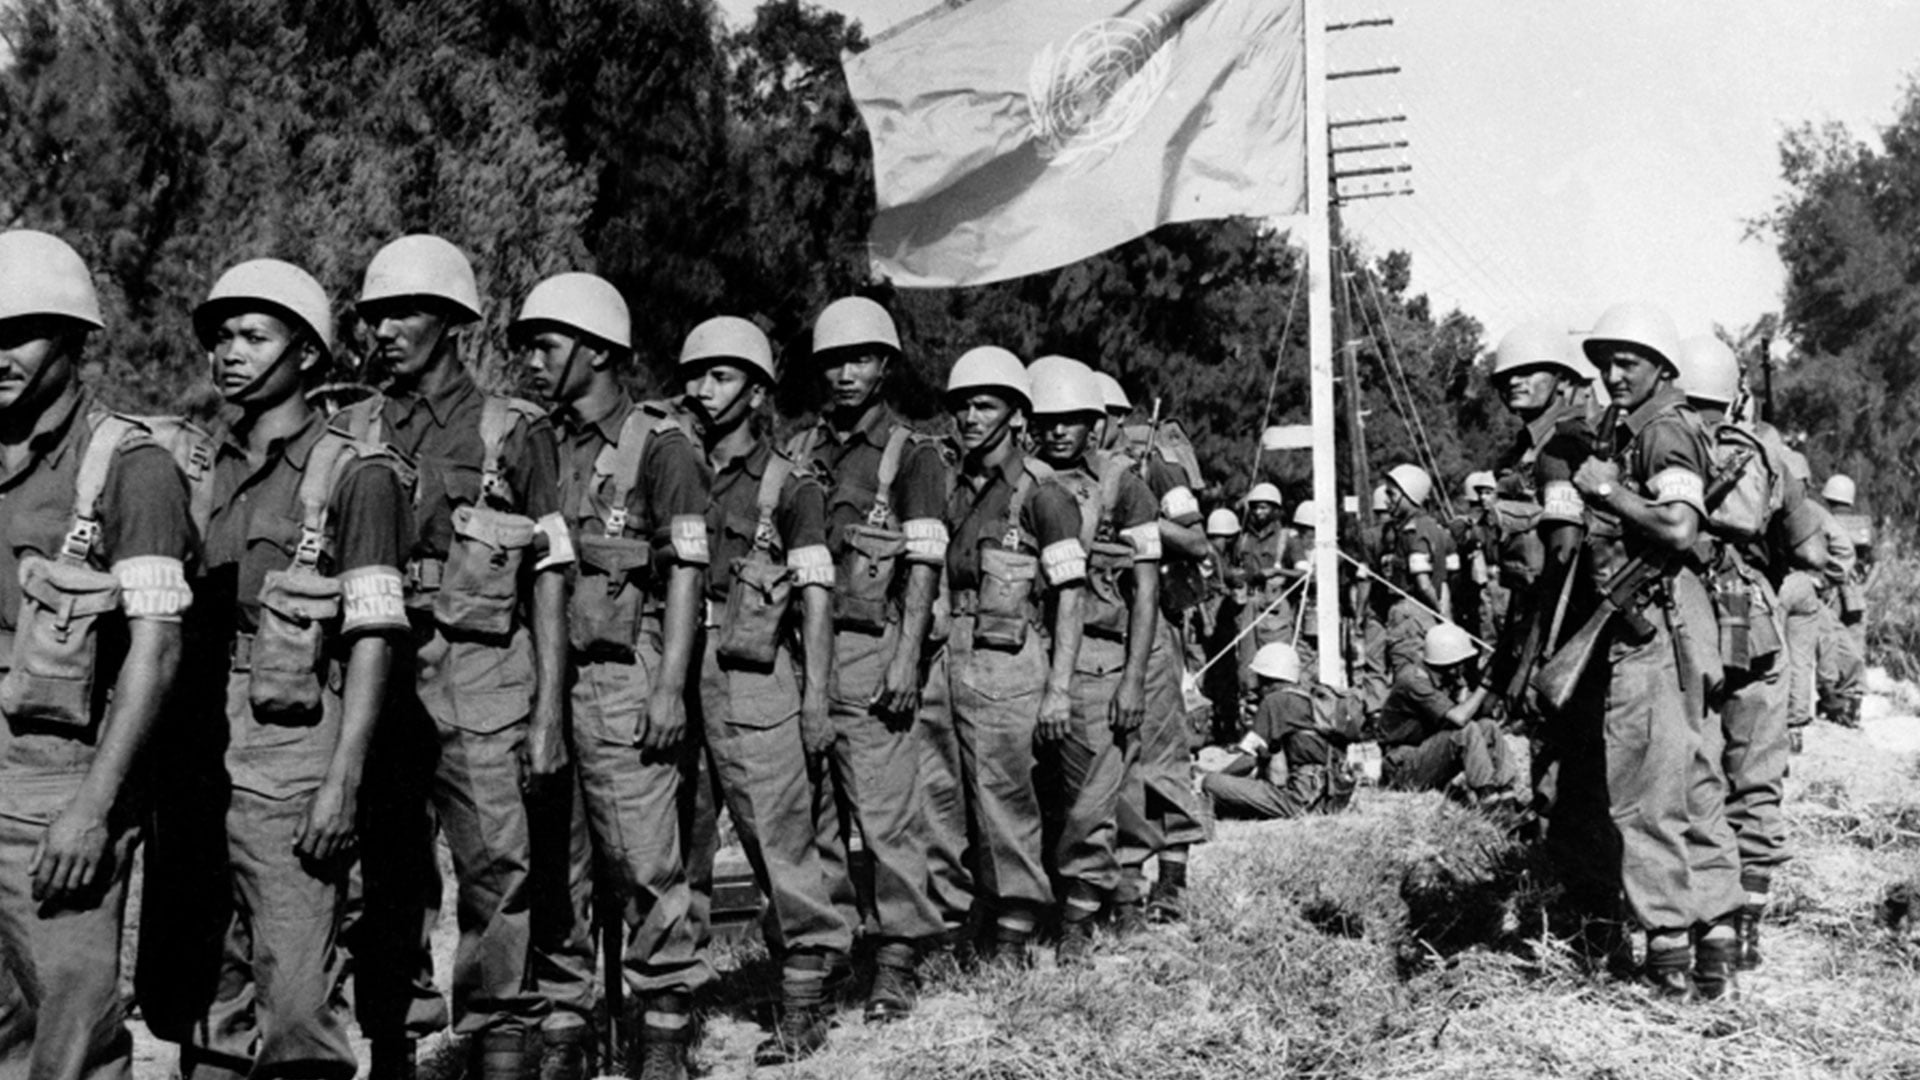 the evolution of egyptian army uniforms in 1956 a historical analysis